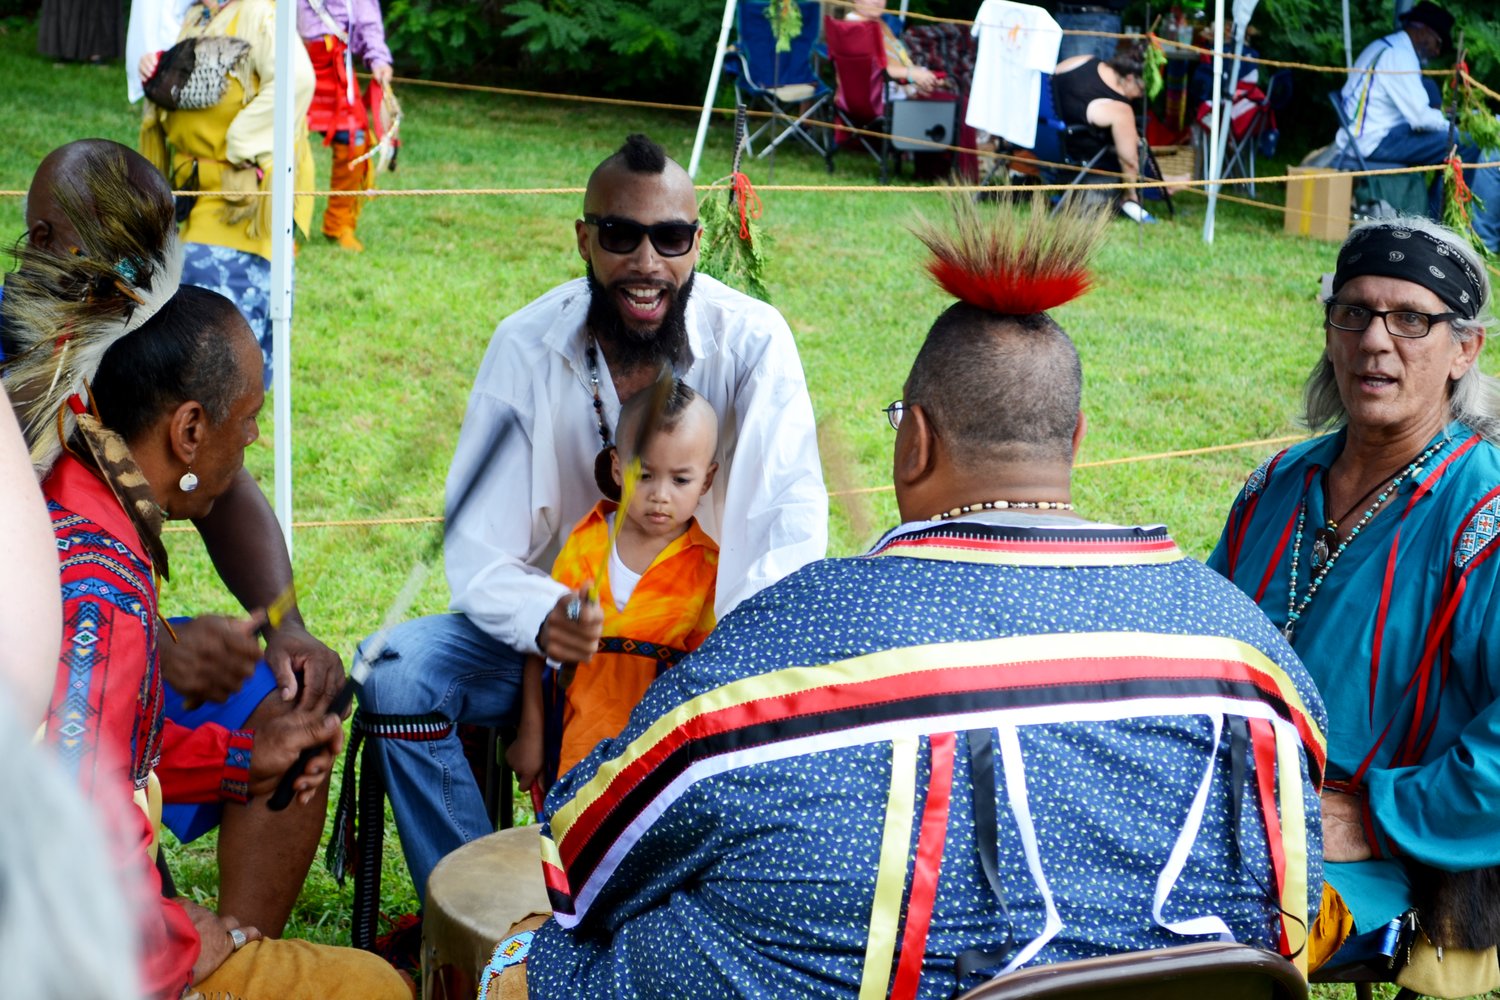 Raymond Two Hawks Watson and his son, Asher Bear Paw Watson, from the Mashapaug Nahaganset Tribe, treated the gathered public to traditional Pokanoket drumming and singing during the welcoming ceremony.